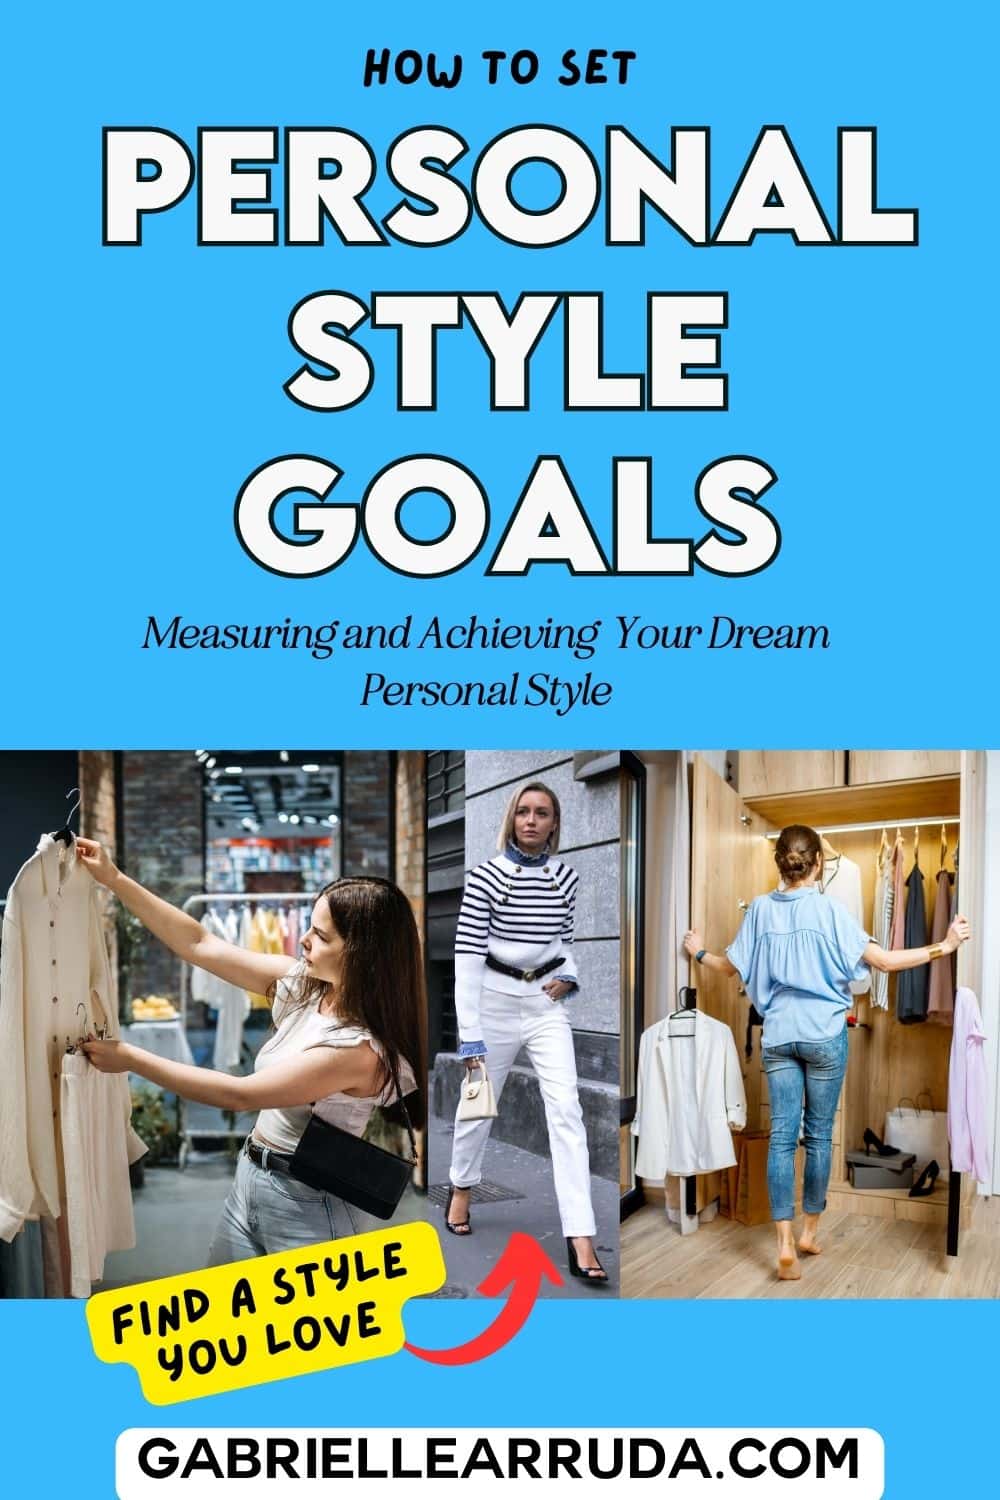 how to set personal style goals with fashion images of women trying different styles